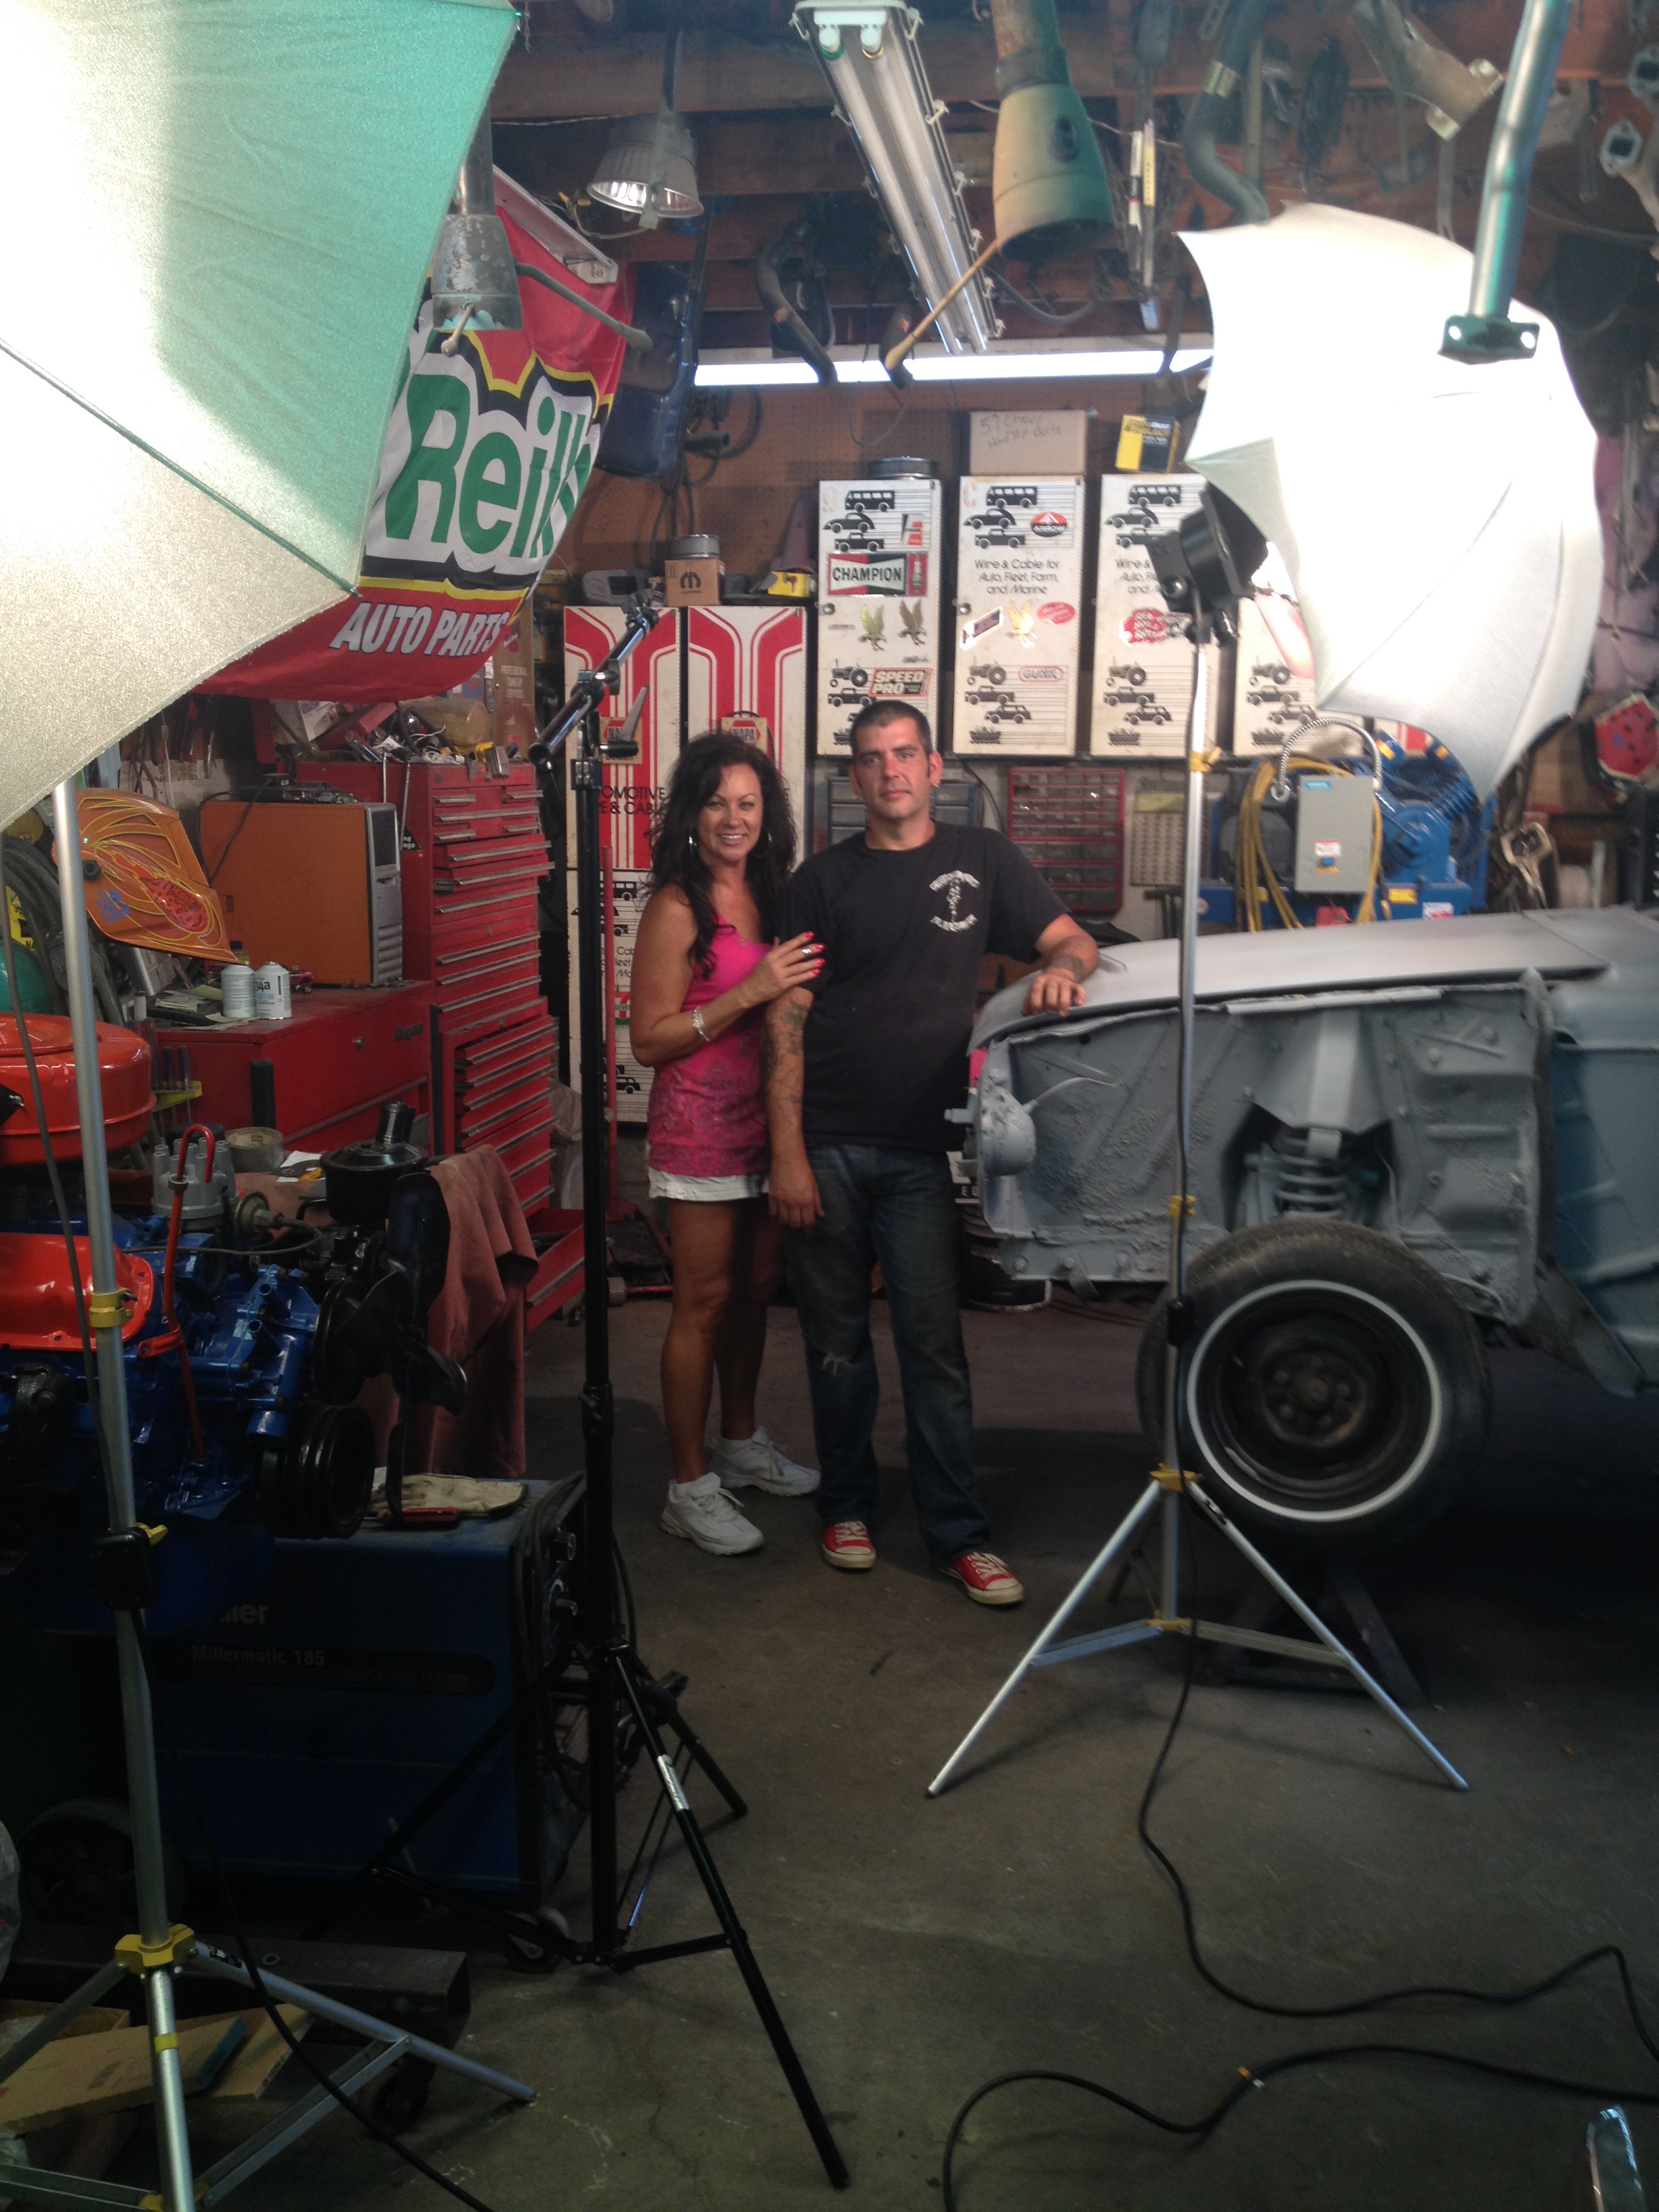 Directing Filming in an 120 degree Body Shop with 